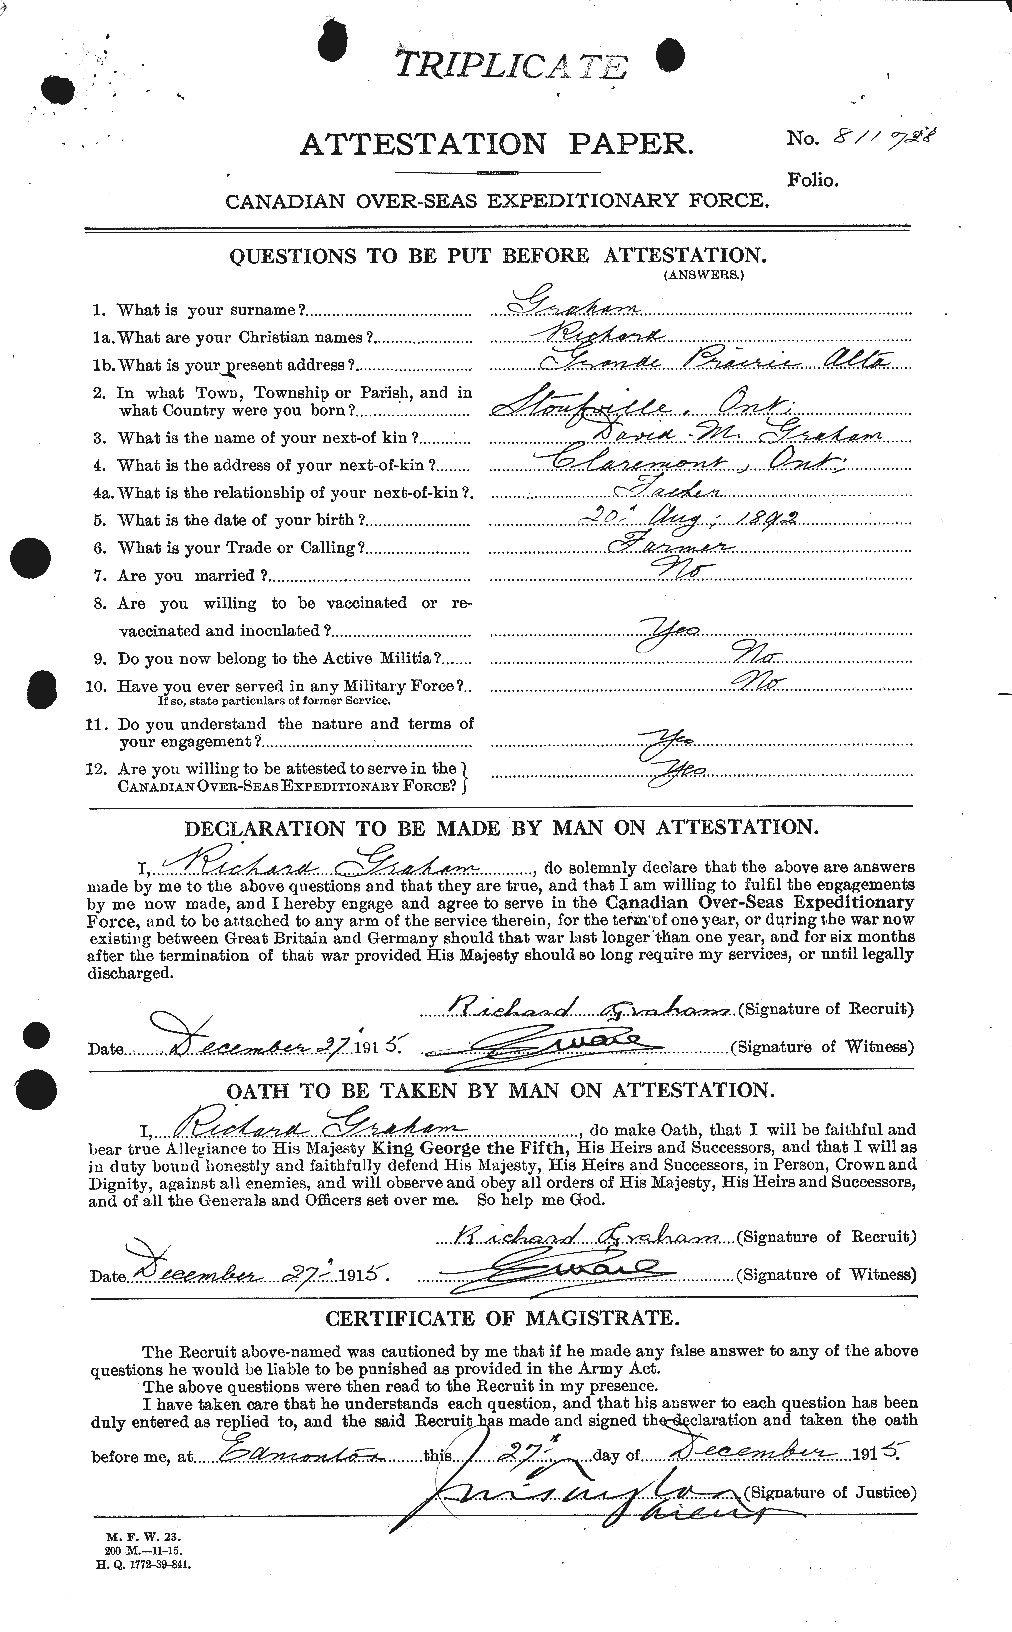 Personnel Records of the First World War - CEF 359365a